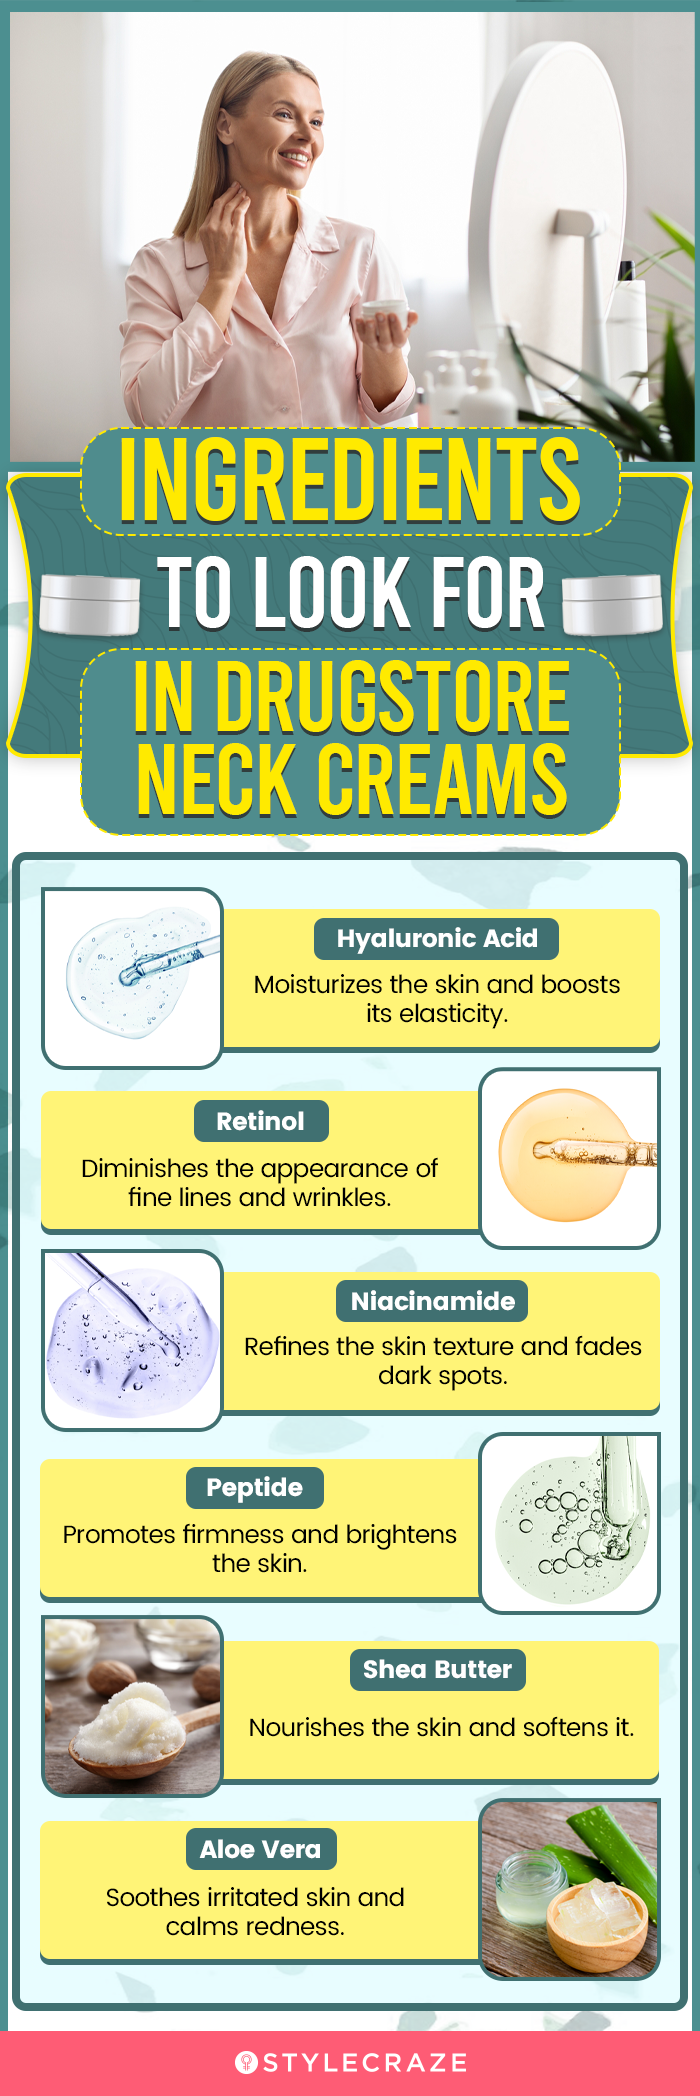 Ingredients To Look For And Avoid In Drugstore Neck Creams (infographic)